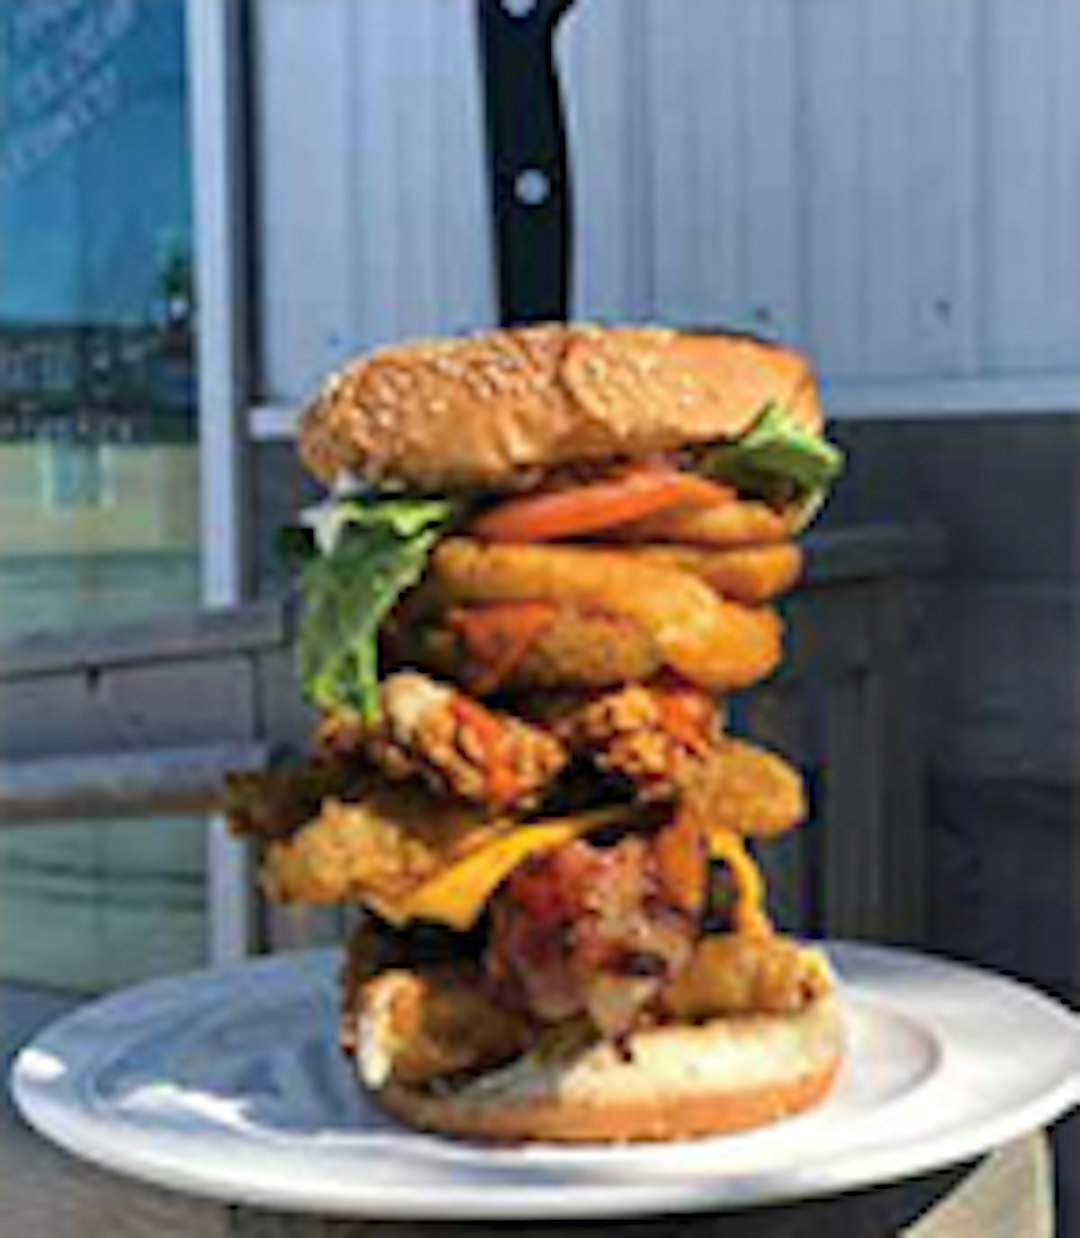 A towering multi-layered burger with various fillings and a knife stabbed through the center for support.